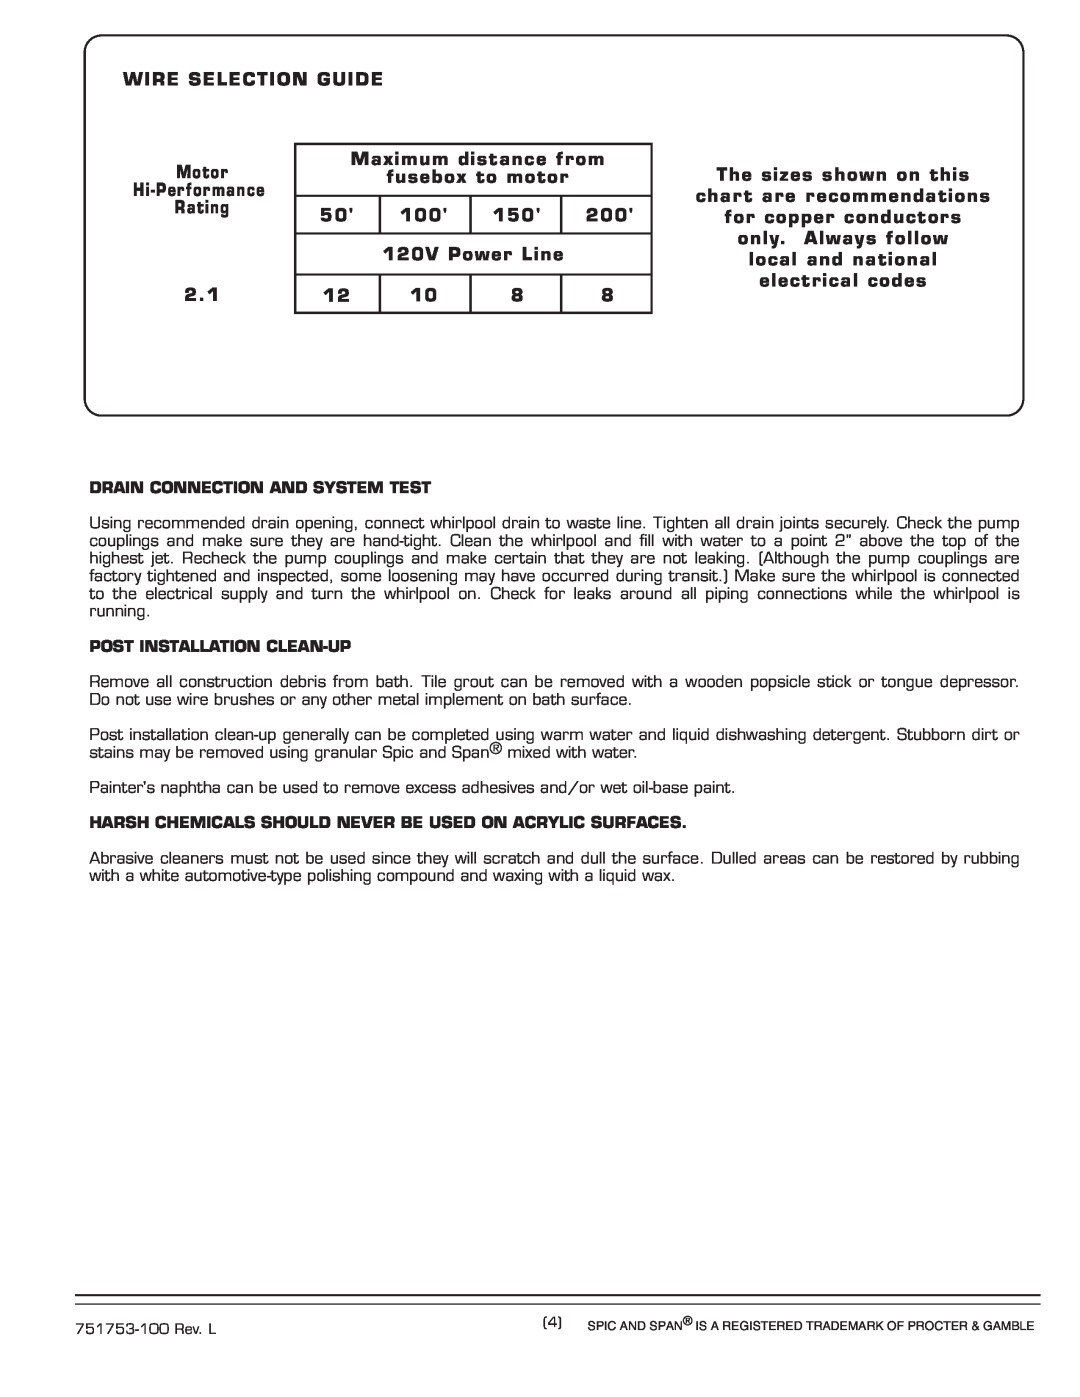 American Standard 2709 installation instructions Wire Selection Guide 